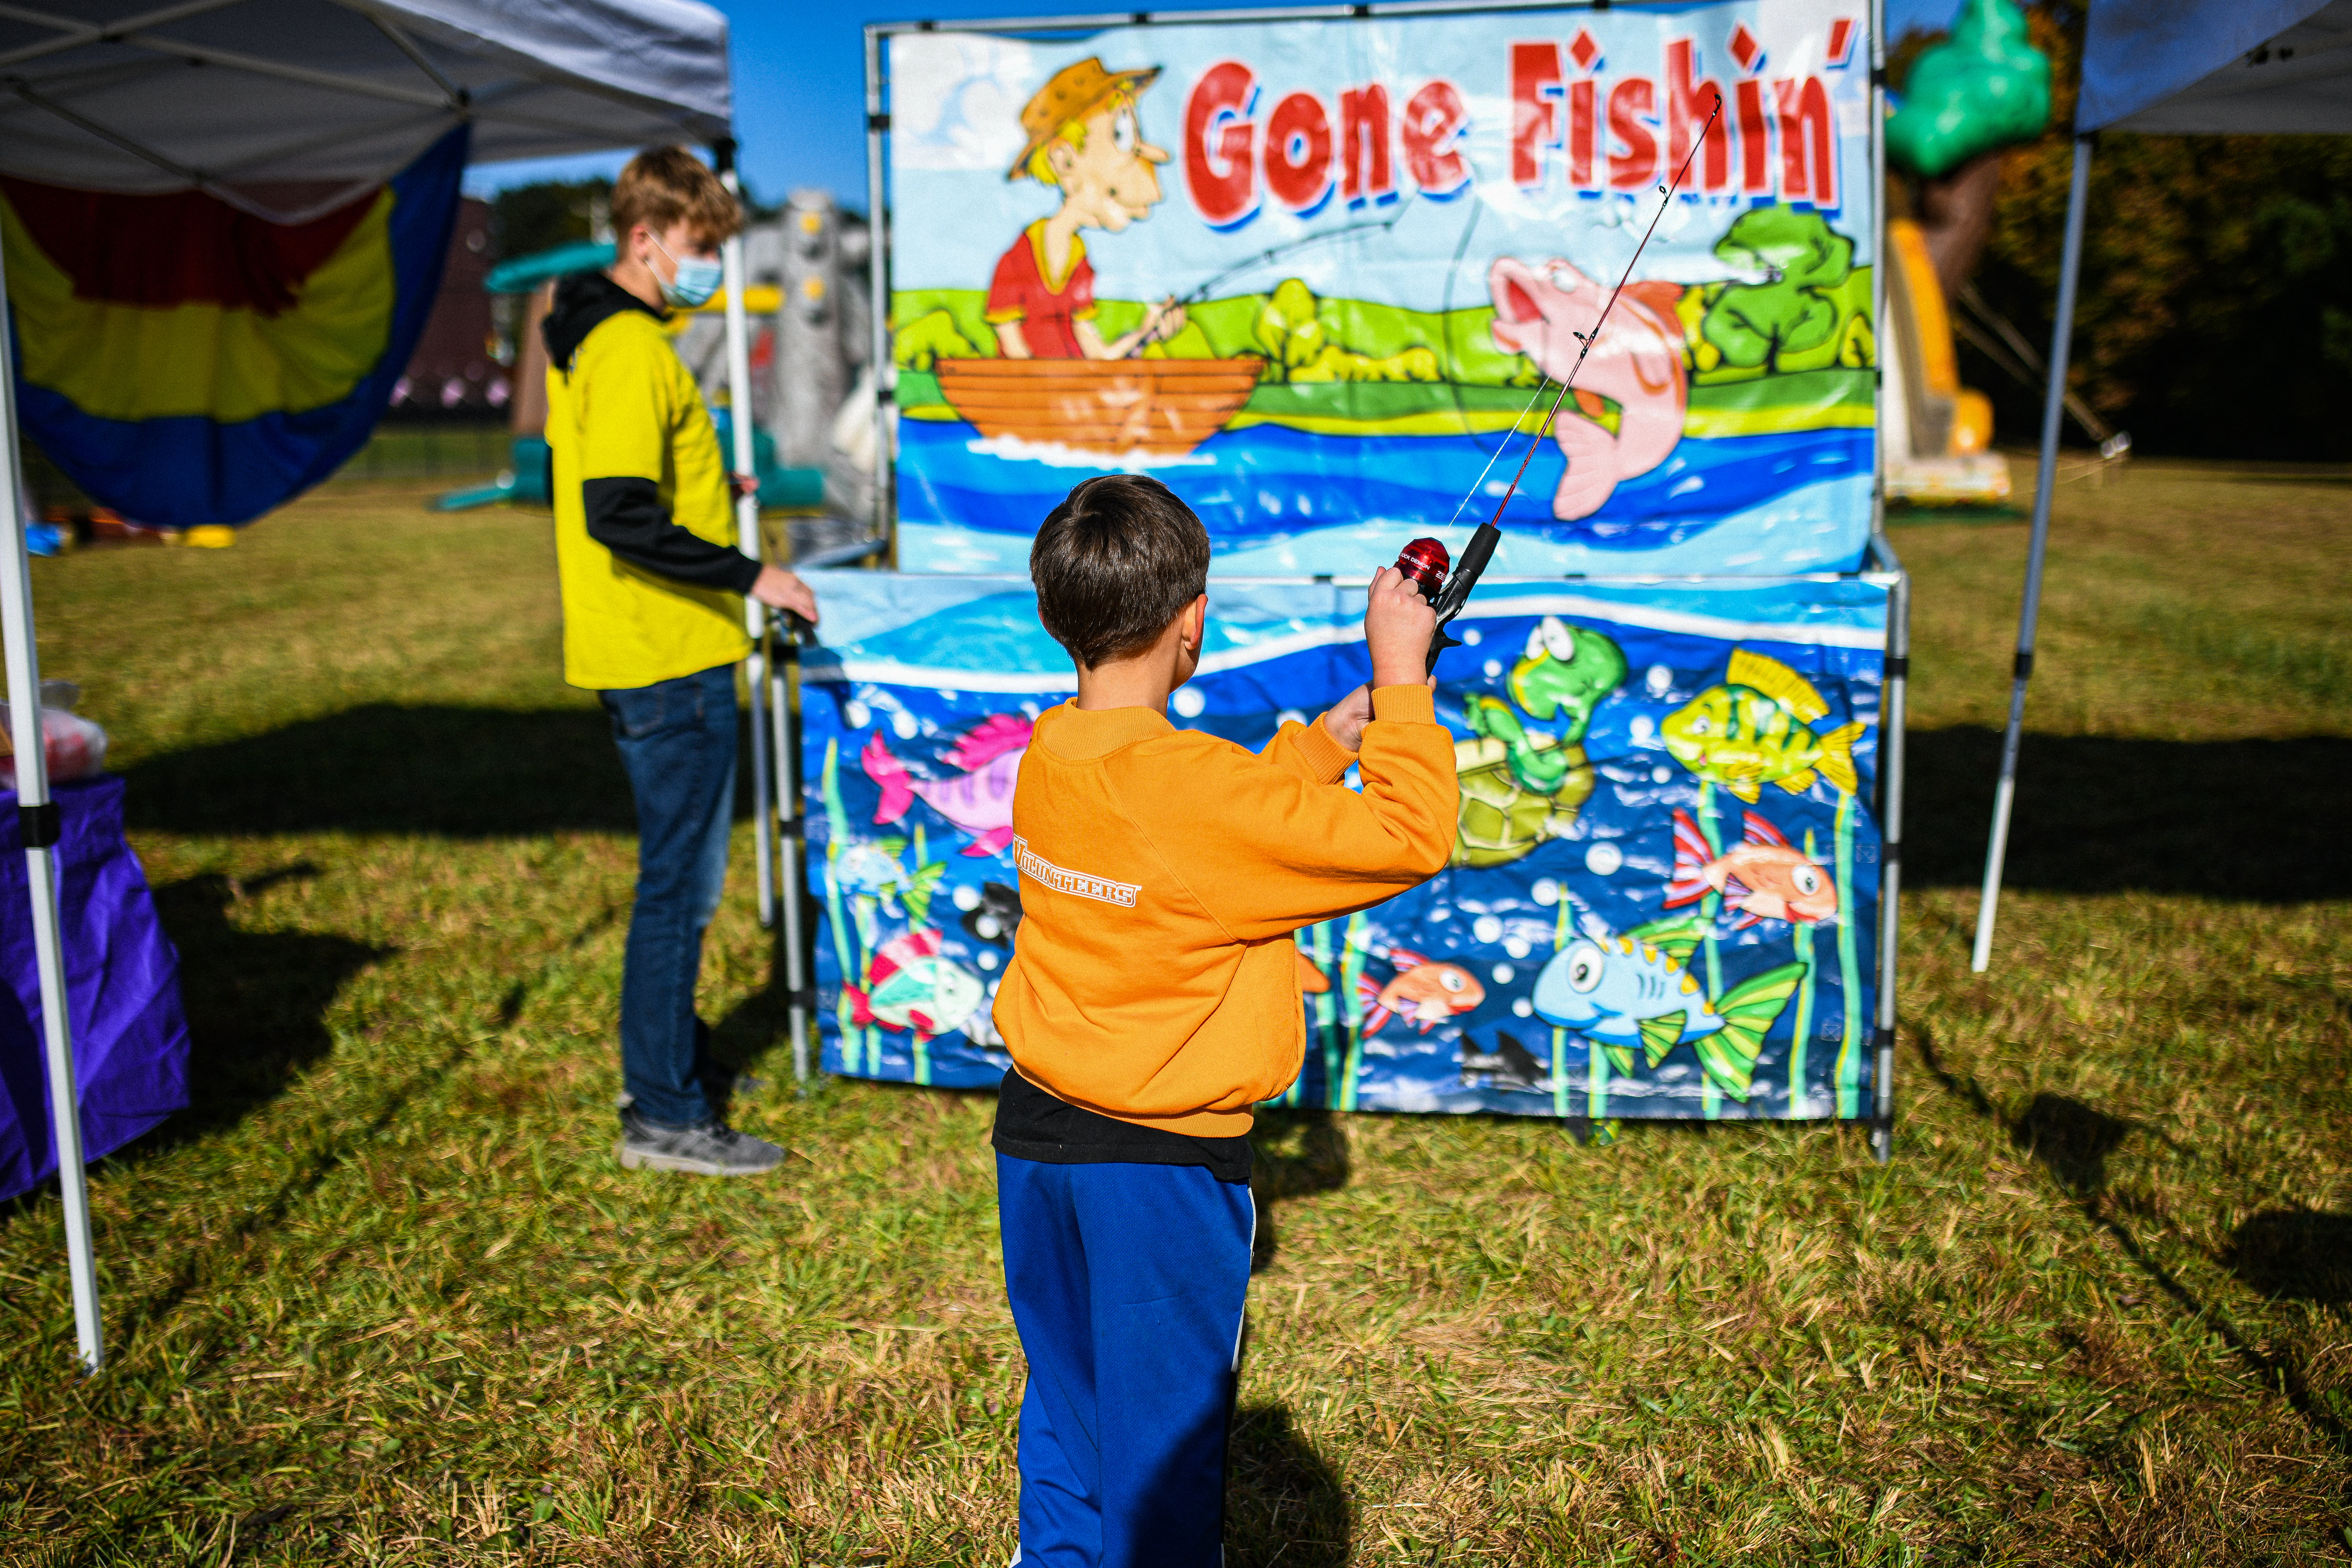 GONE FISHING FRAME GAME, Magic Special Events